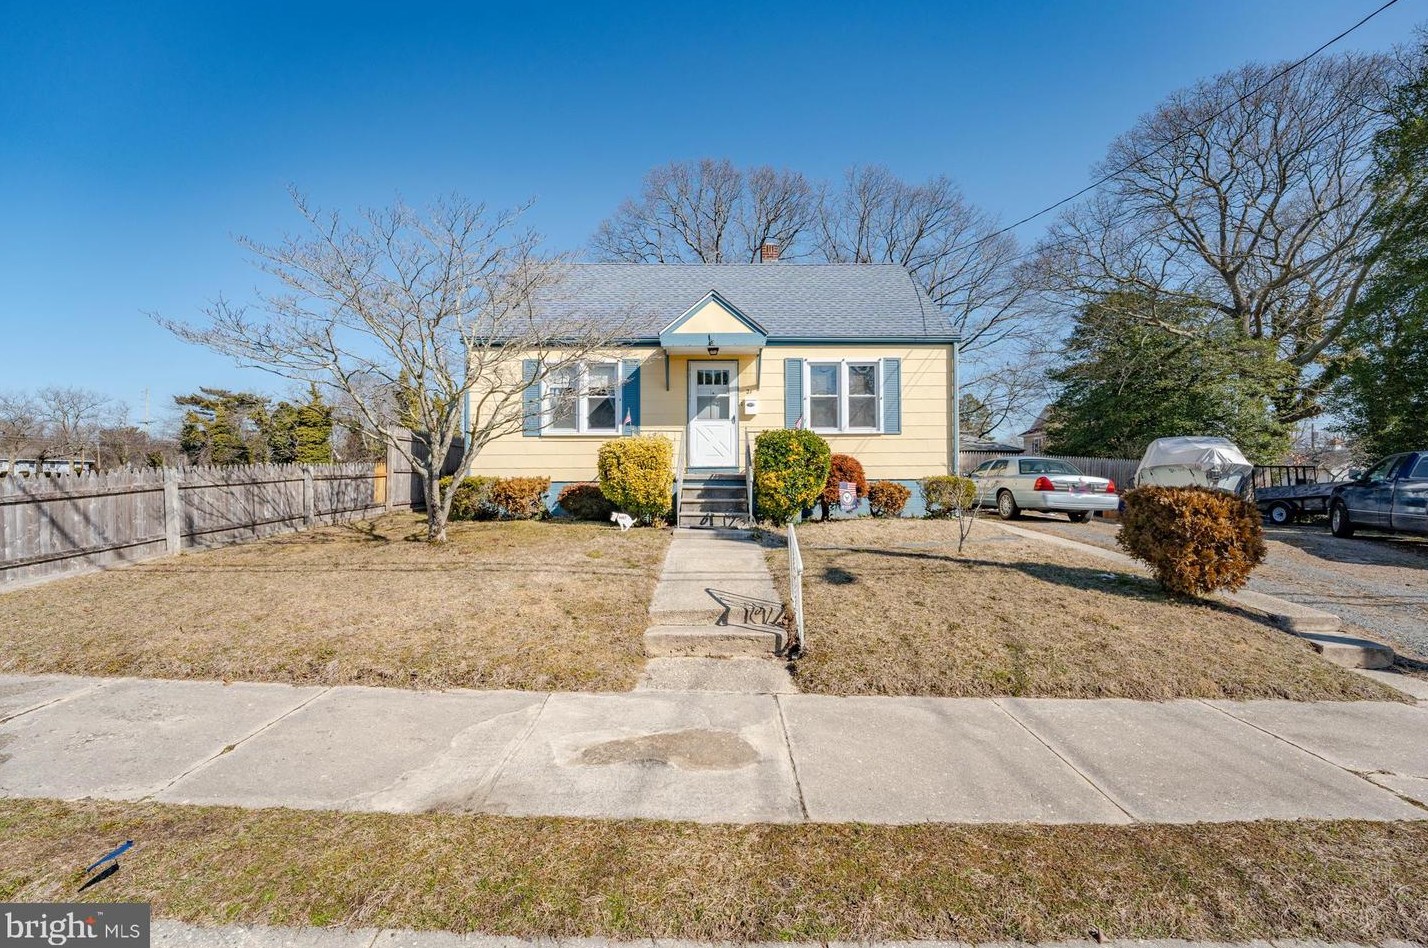 21 E Pierson Ave, Somers Point, NJ 08244